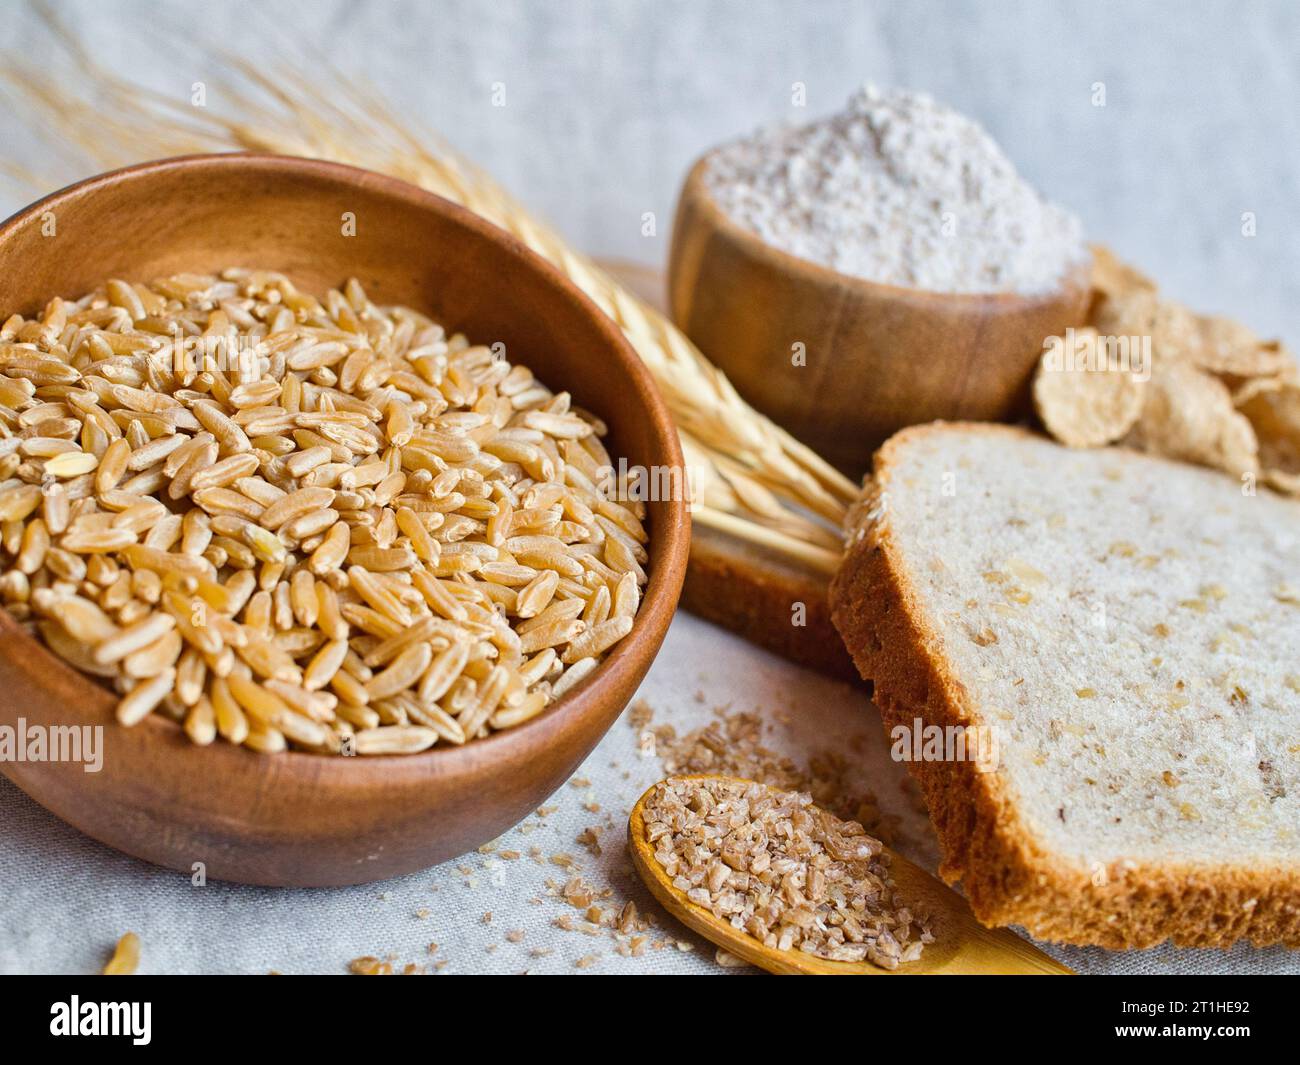 Beautiful still life arrangement of variety of wheat products; kamut, bulgur, flour, grain bread, and wheat cereal. Image contains gluten. Stock Photo